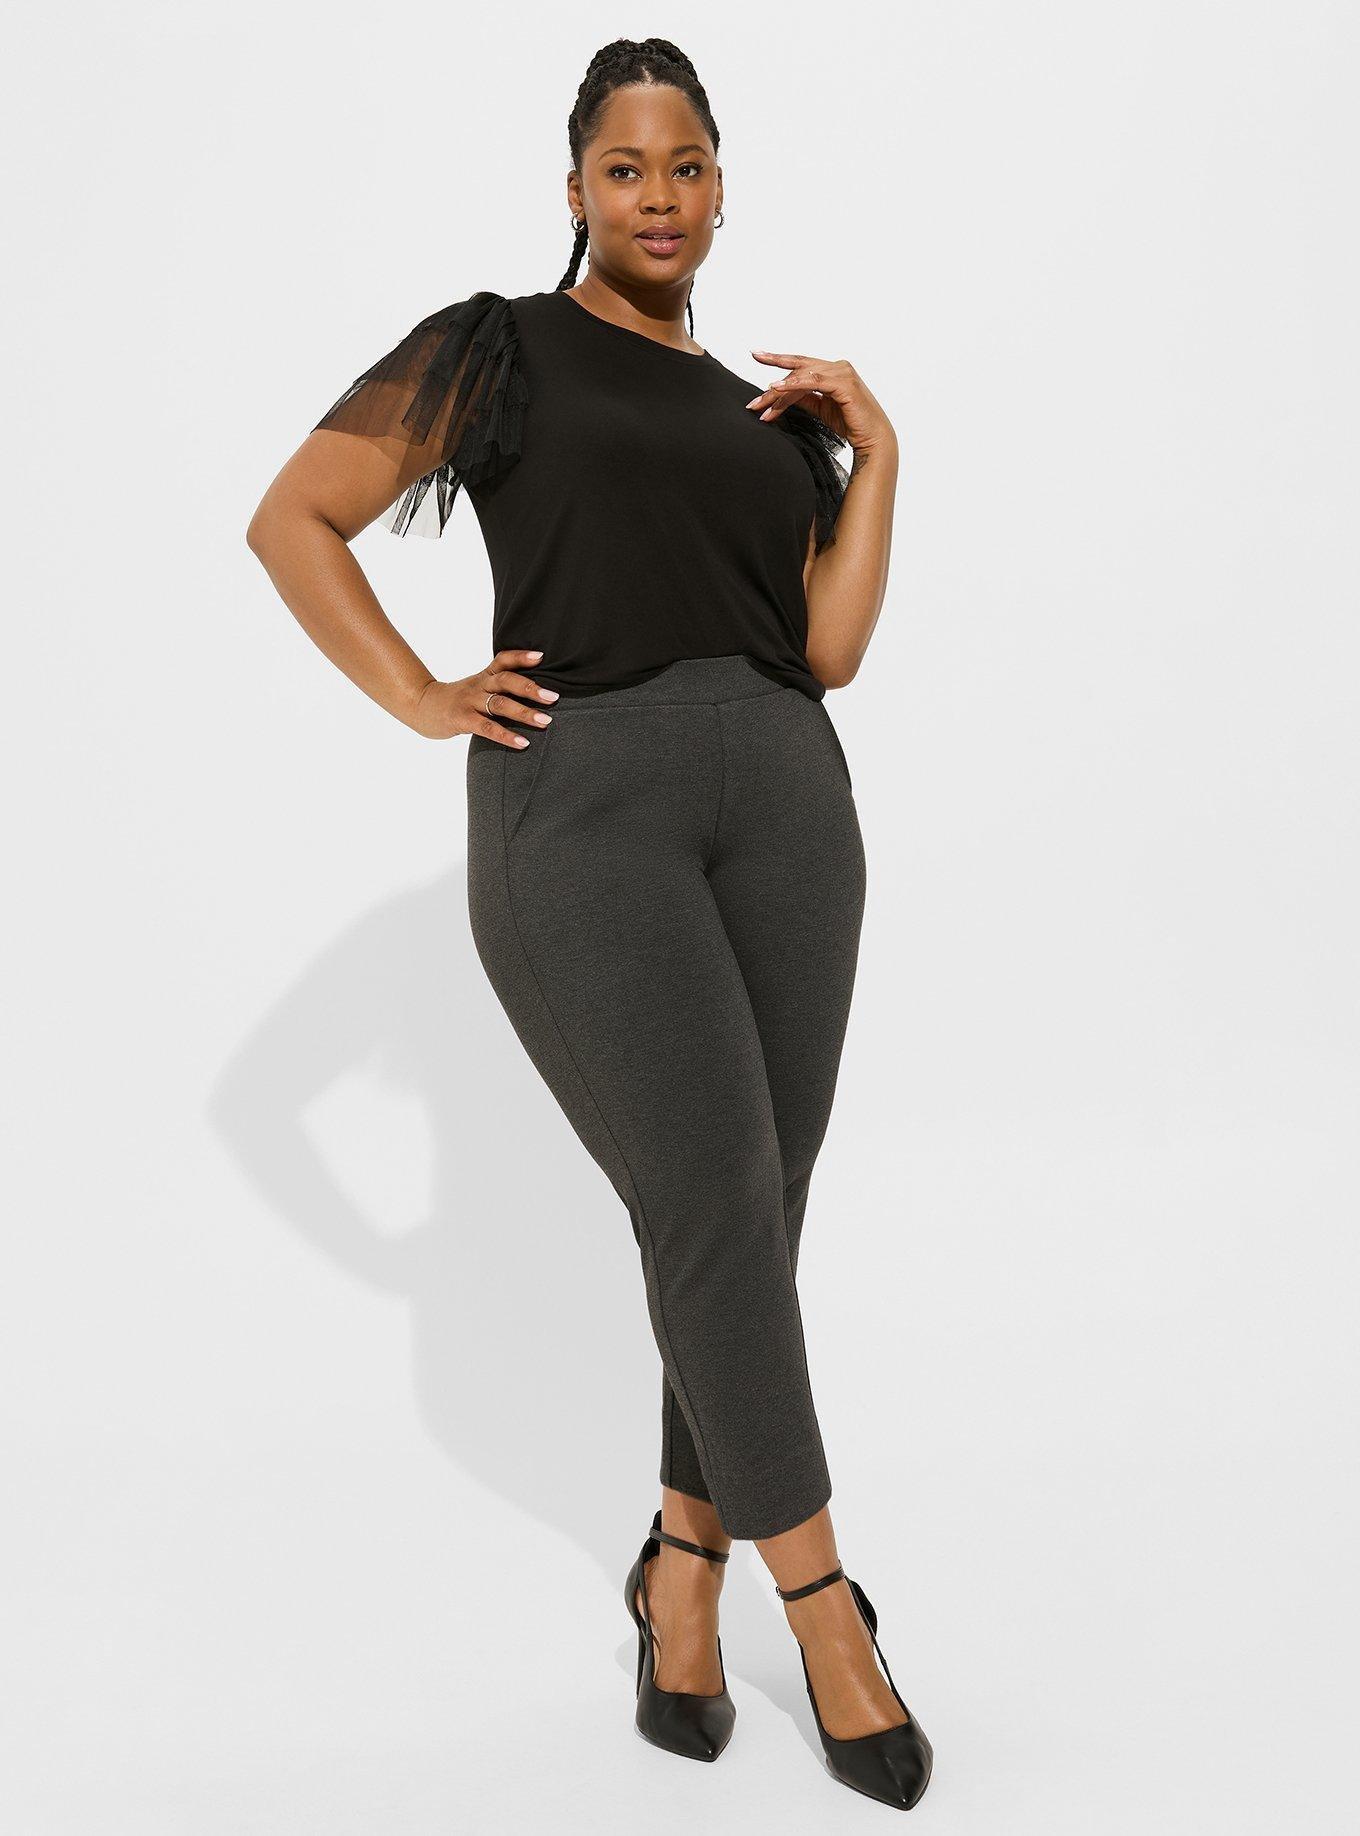 RealSize Women's Plus Size Pull On Ponte Pants 